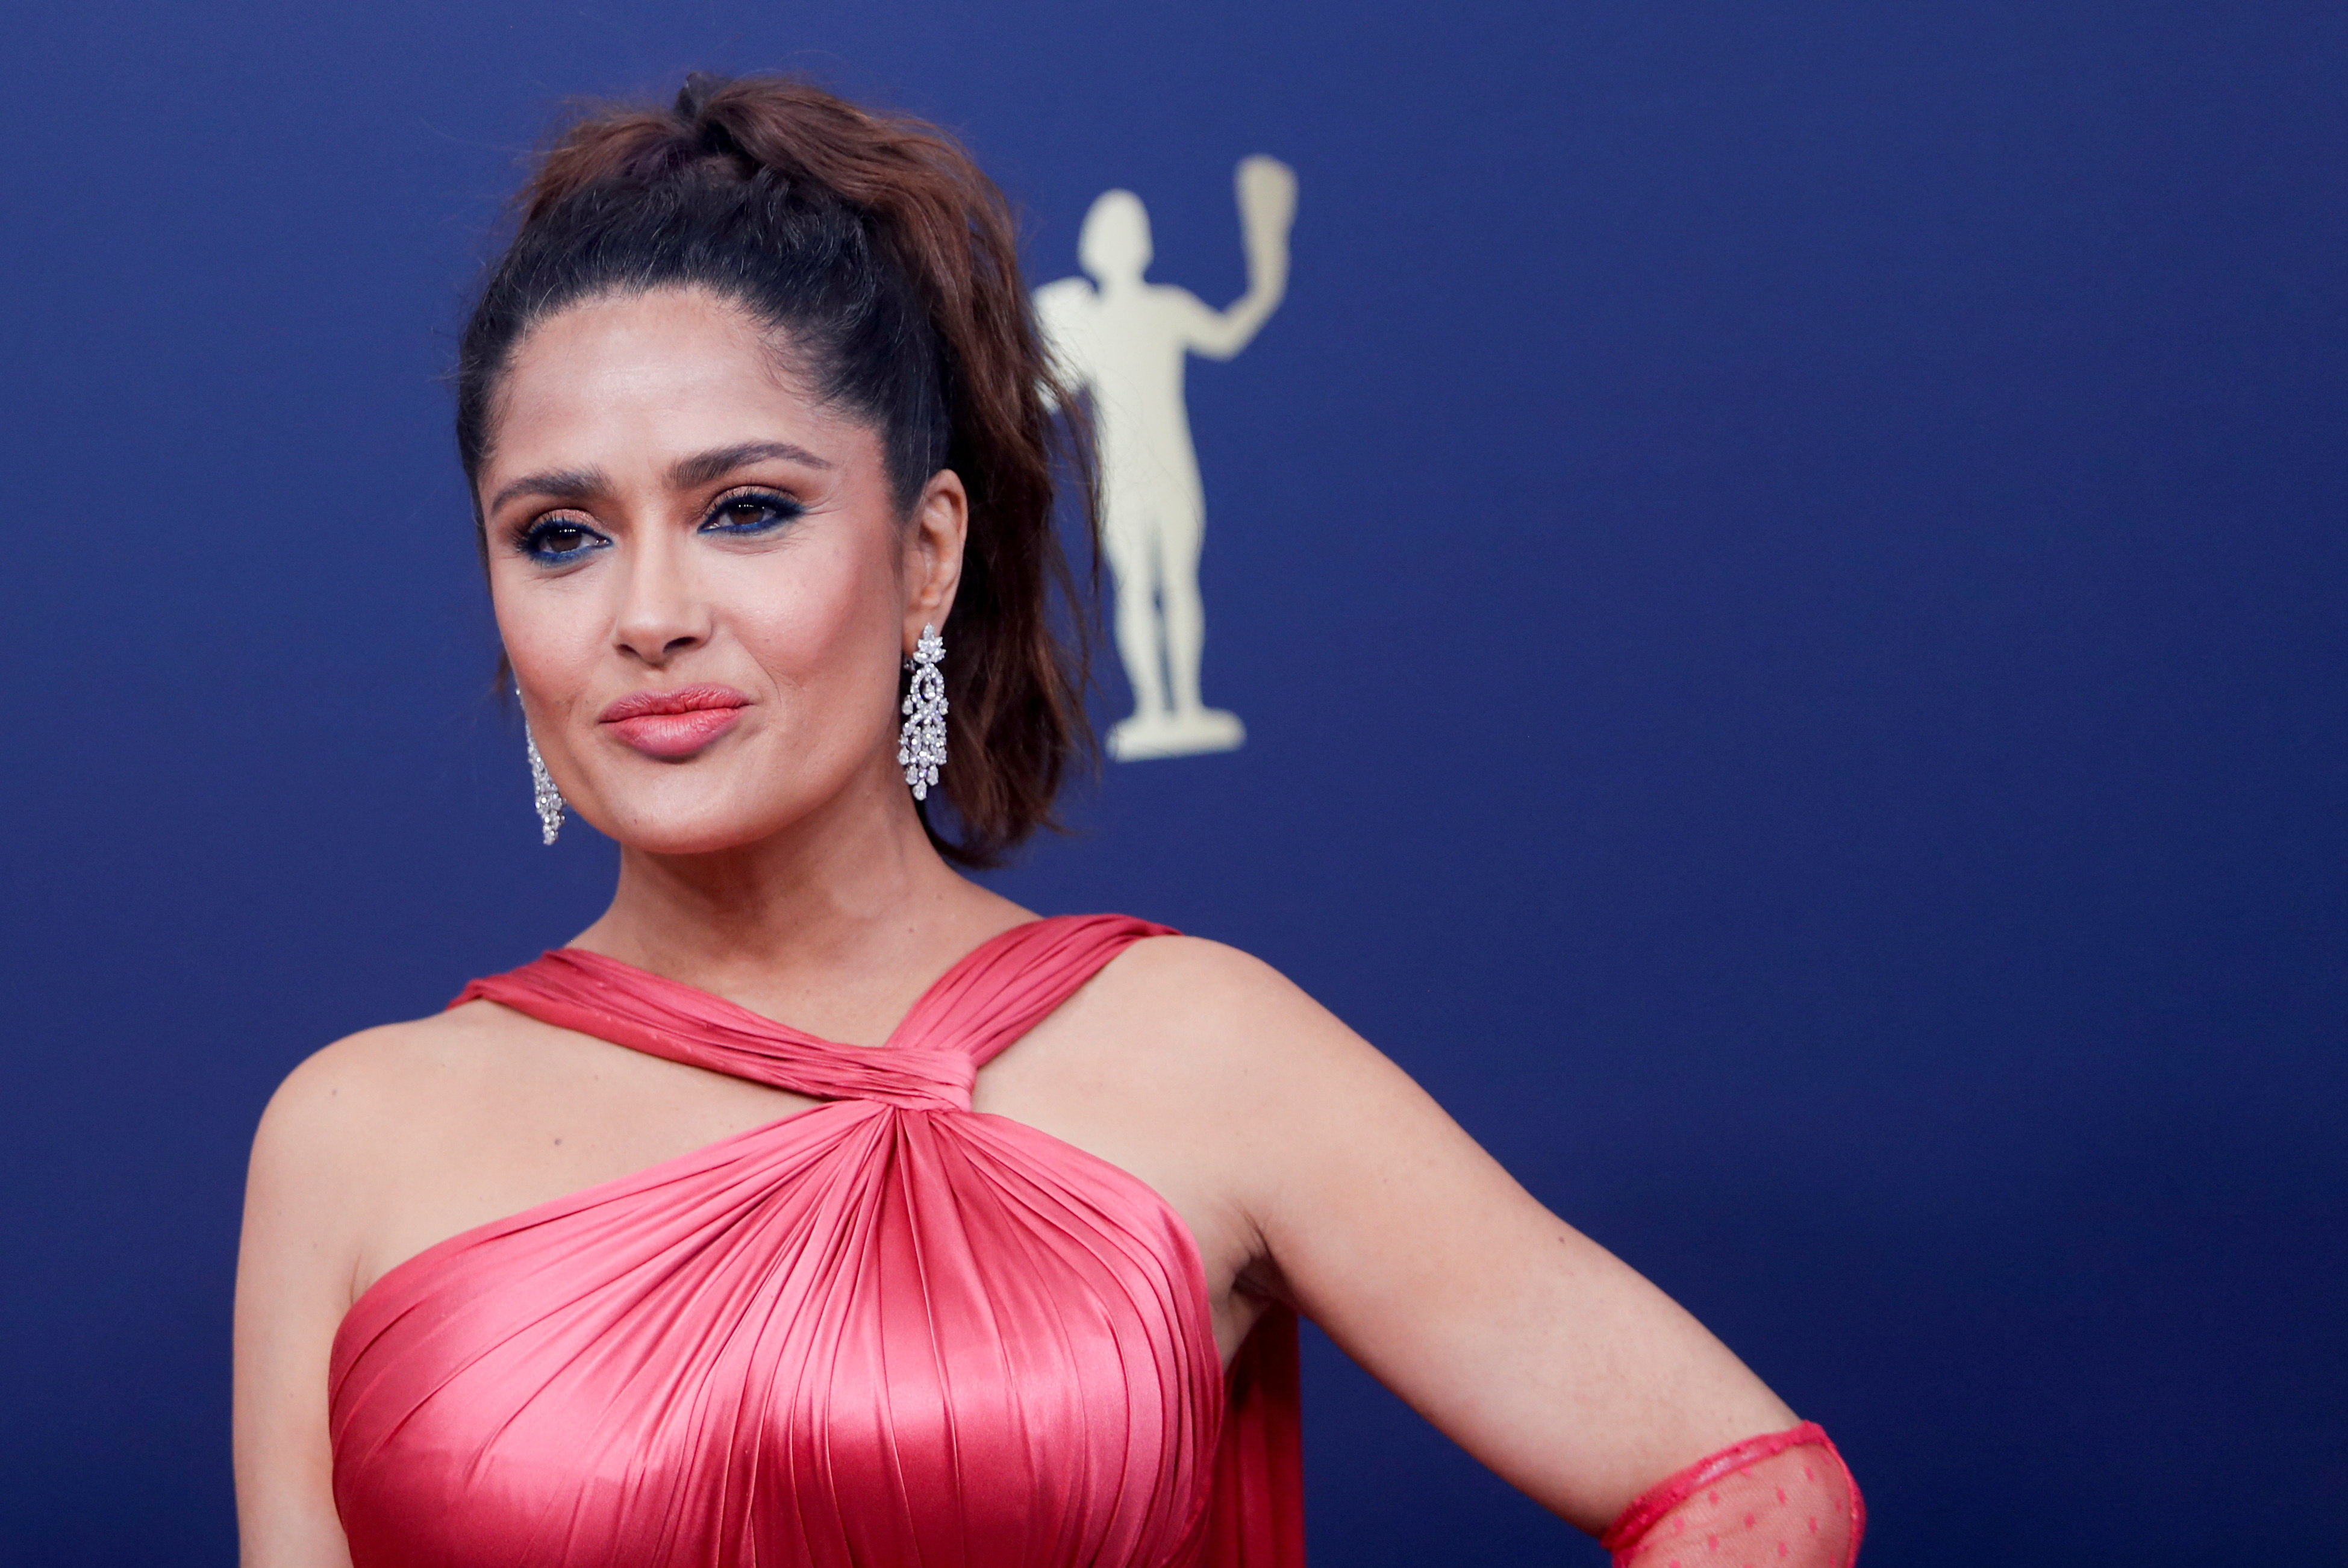 Despite her great fame and undoubted talent, Salma Hayek has not been able to win a statuette (Photo: REUTERS/Aude Guerrucci)